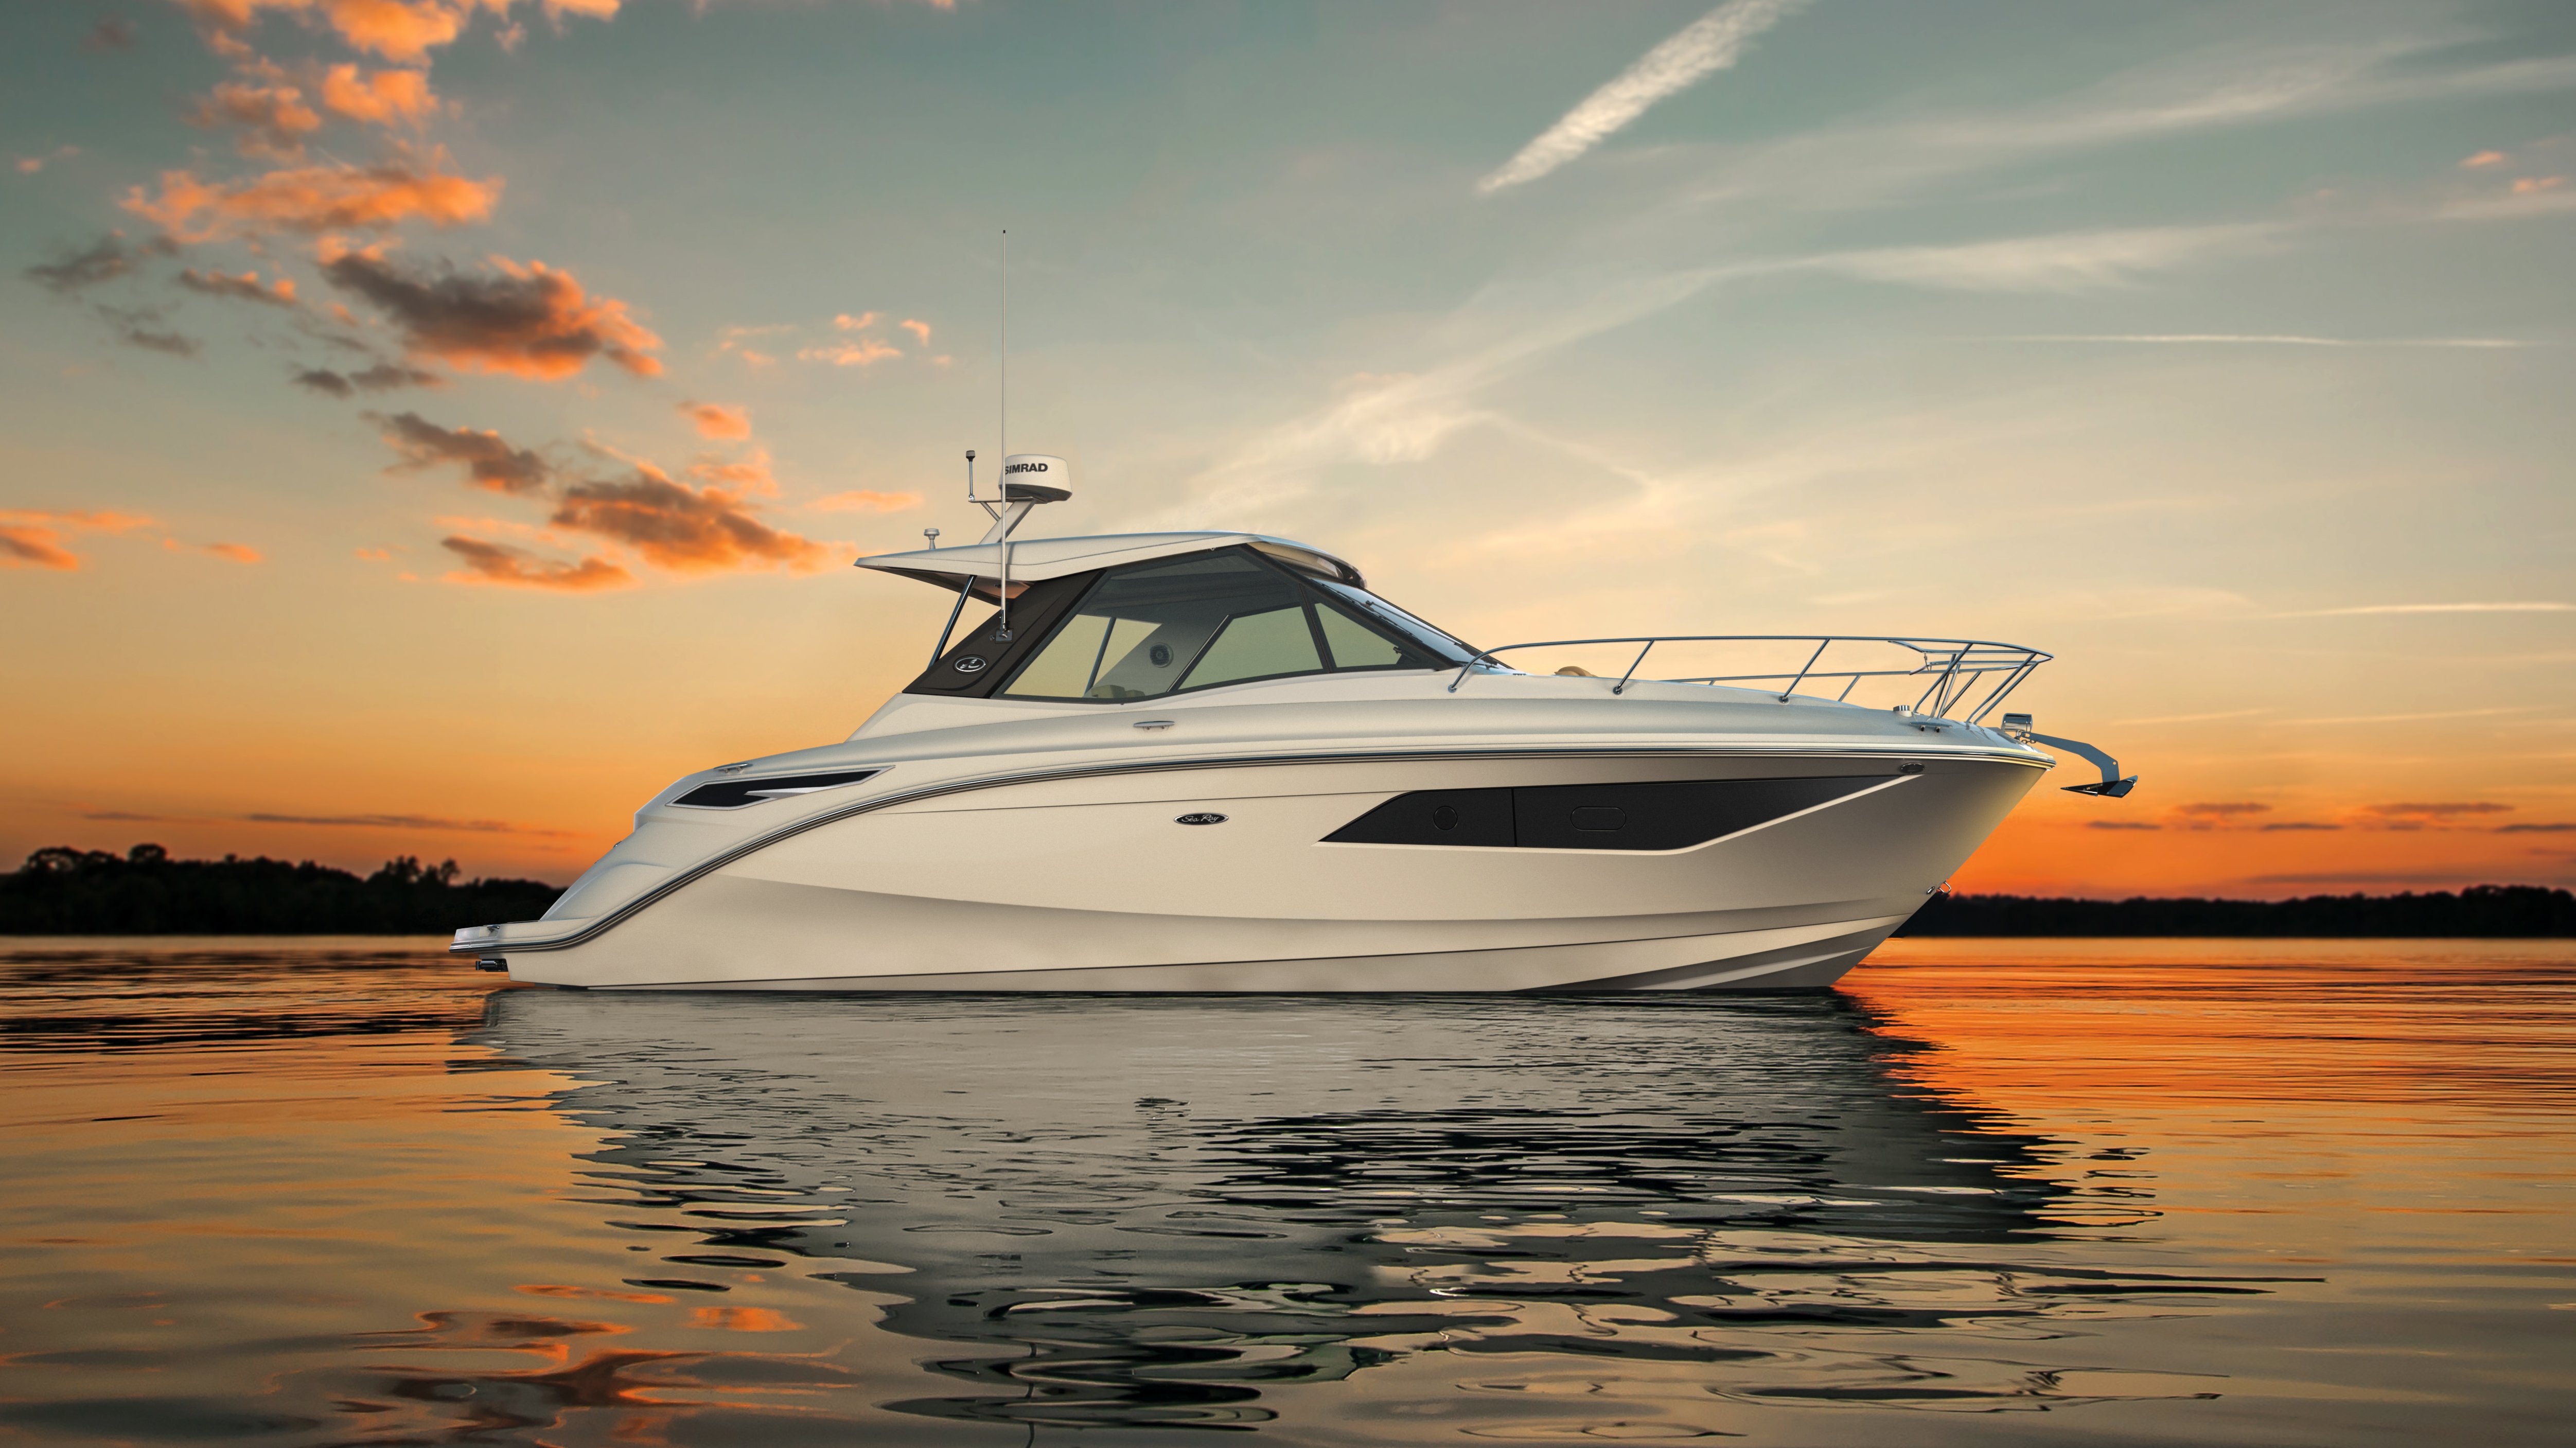 SEA-RAY ®'S-NEW-SUNDANCER-320-COUPE-MAKES-ITS-EUROPEAN-DEBUT-AT-THE-BOOT-DÜSSELDORF-INTERNATIONAL- BOAT-SHOW